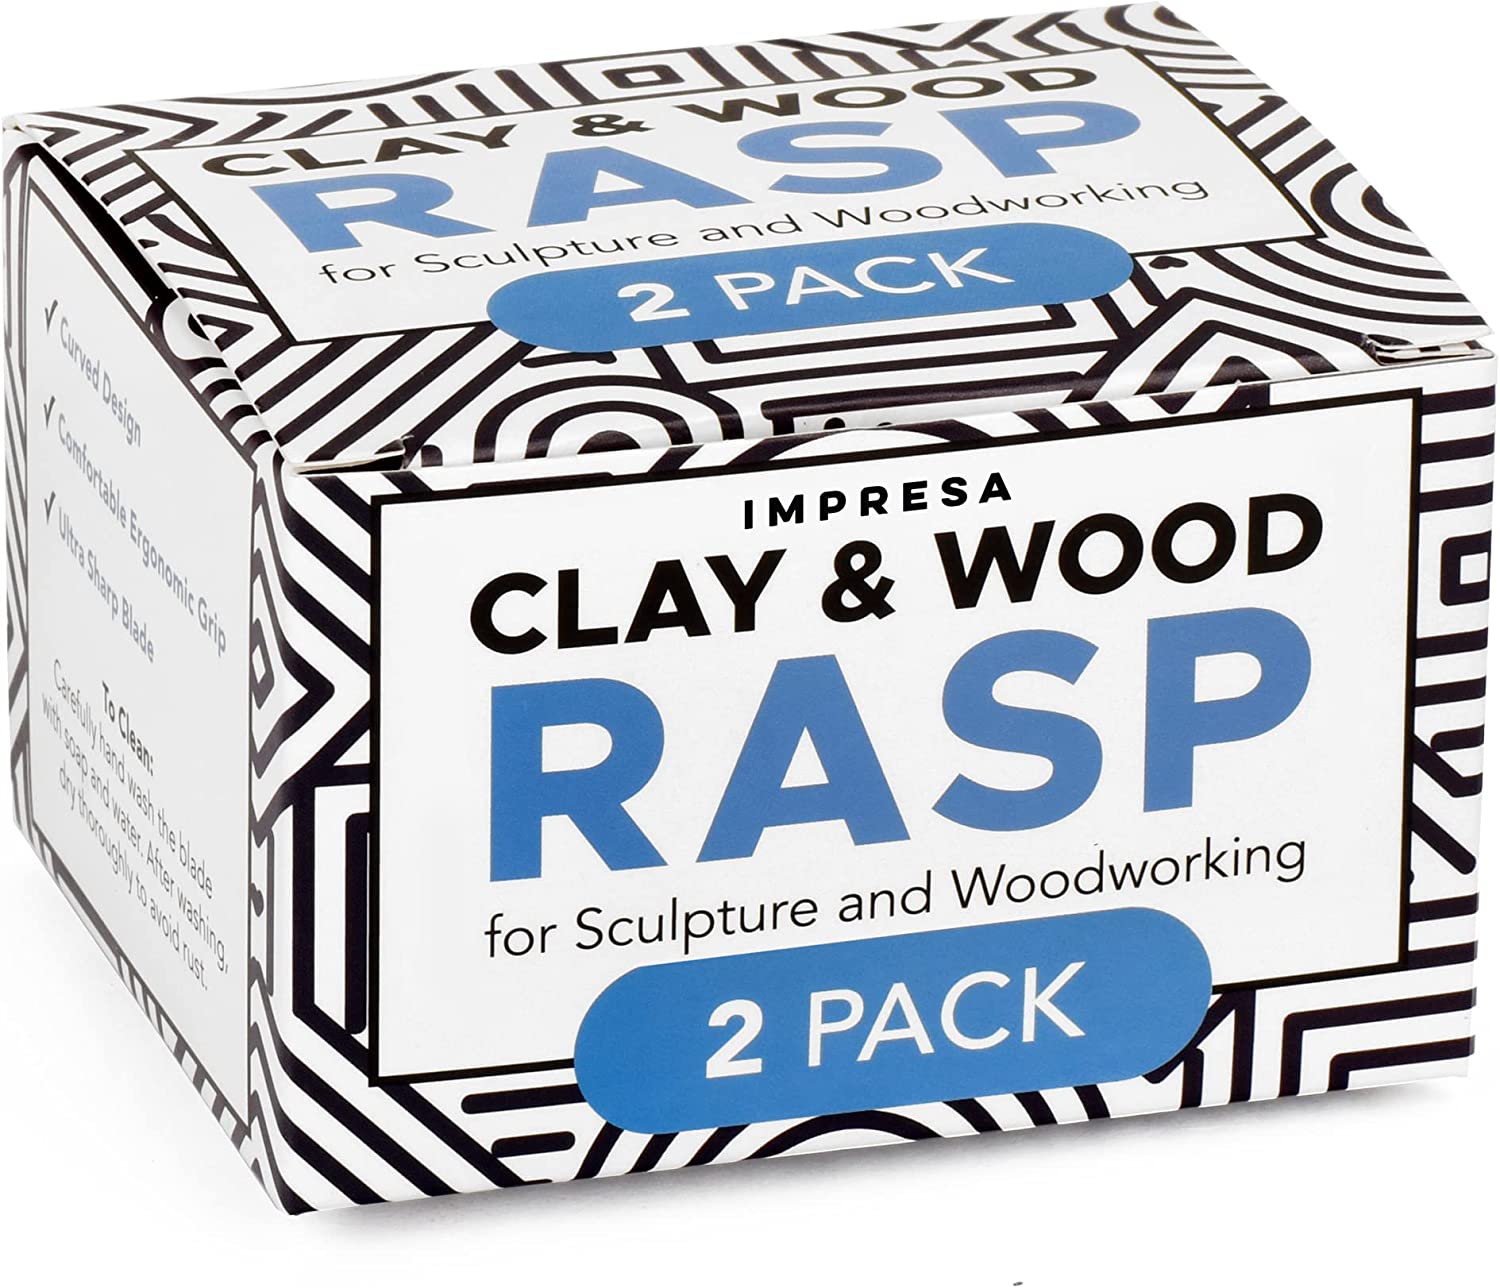 Impresa [2 pack] clay & wood rasp surform tool for sculpture & woodworking  - easy to clean